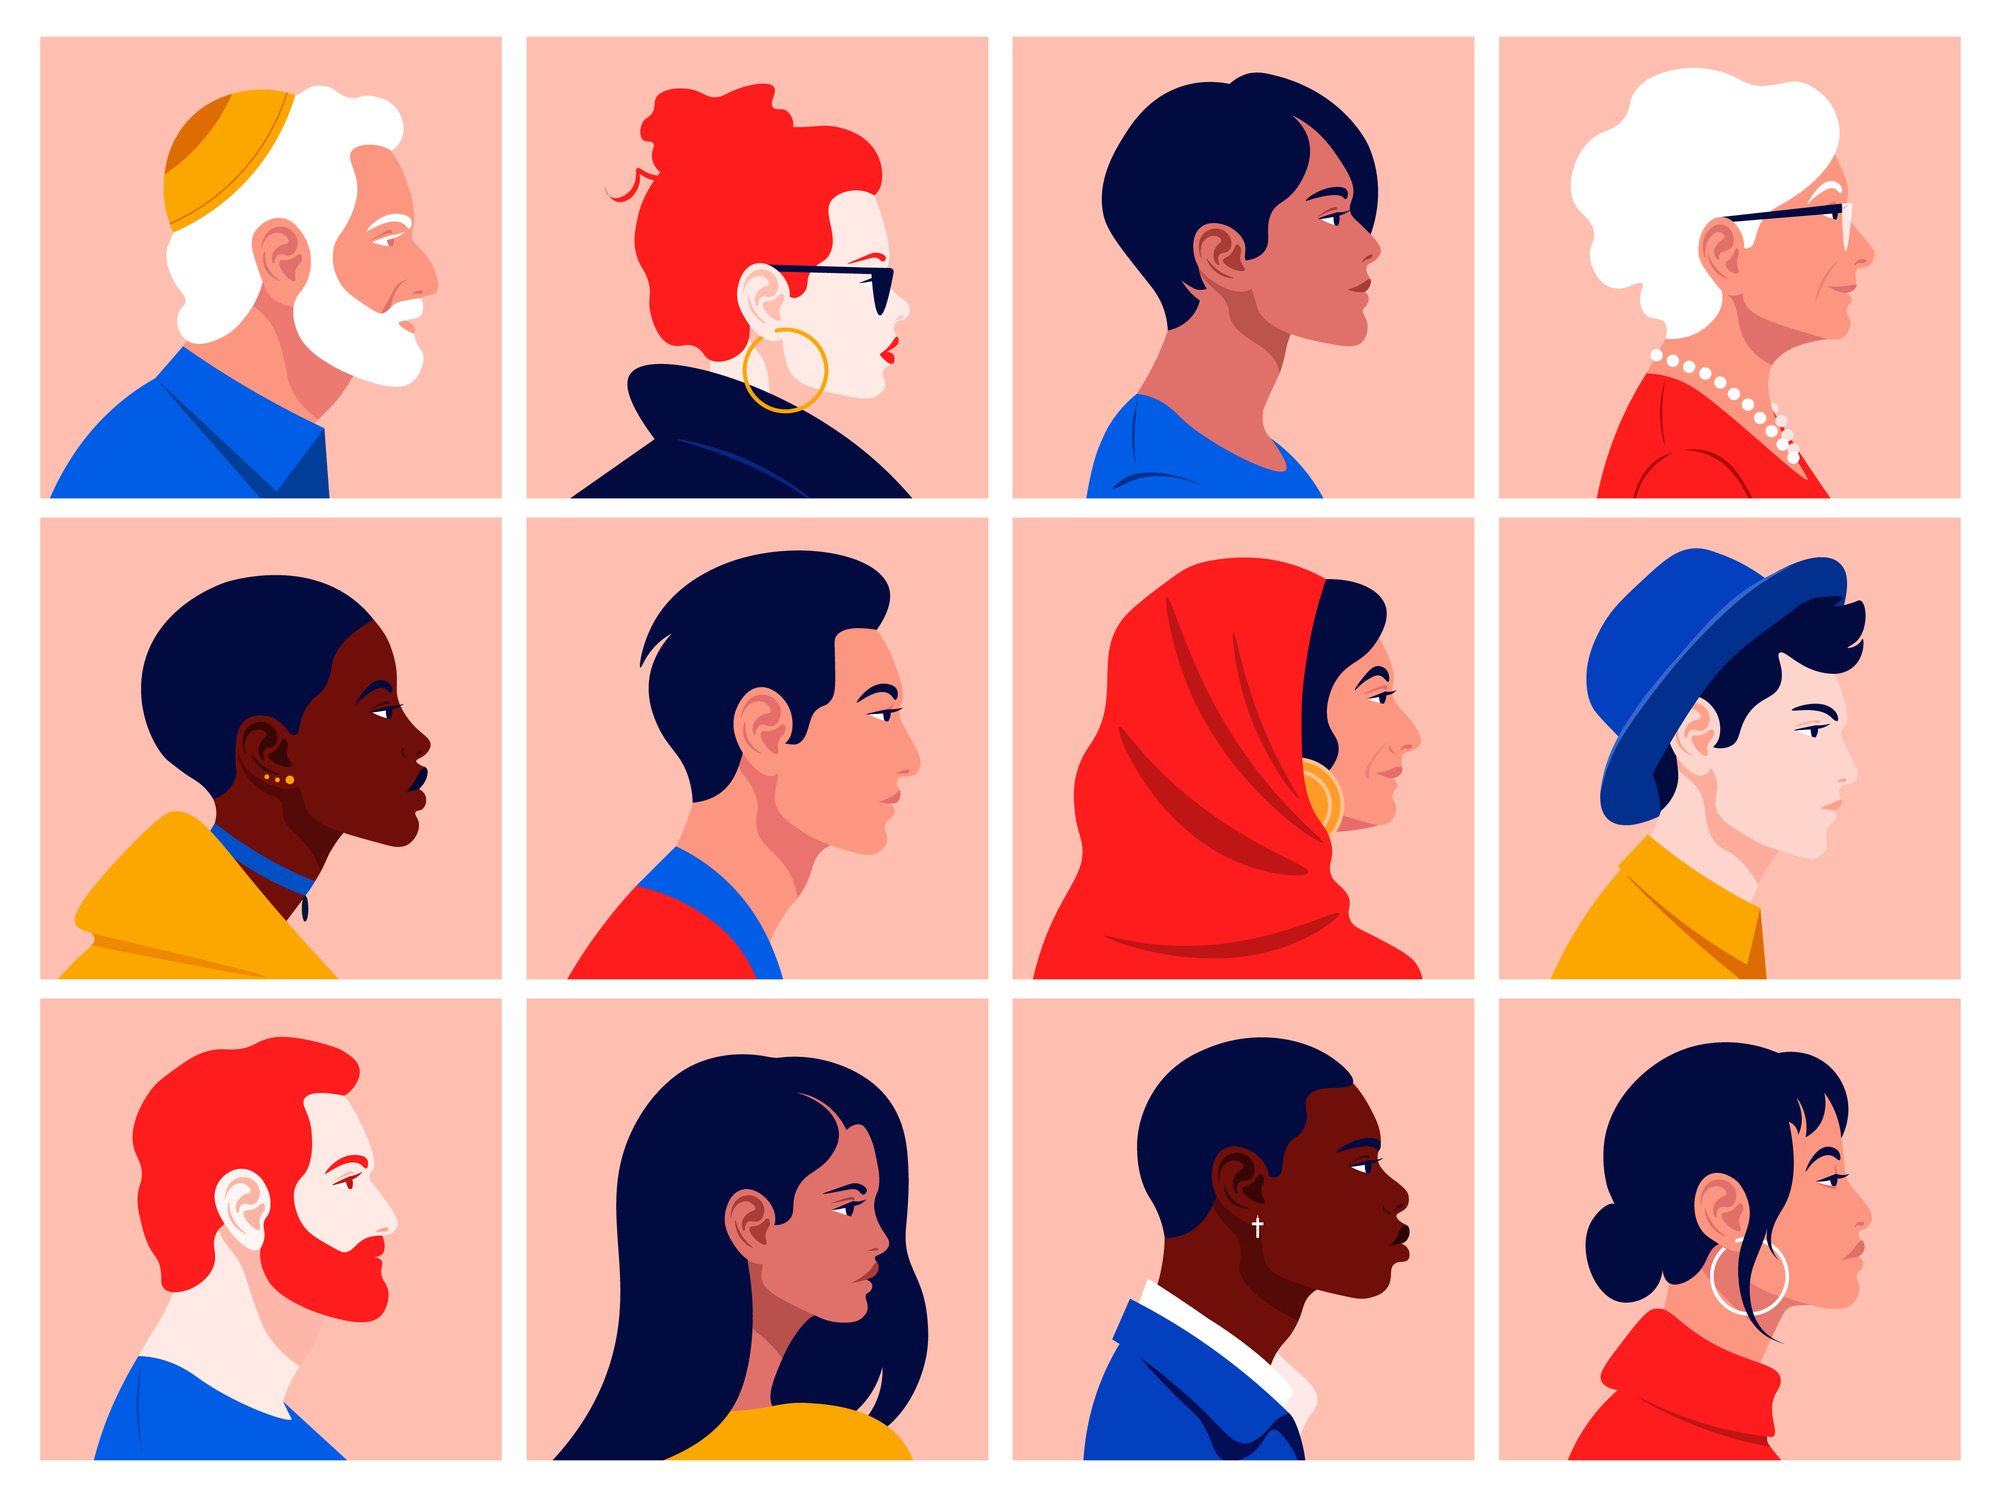 A set of people's faces in profile: men, women, young and elderly of different races and nations.